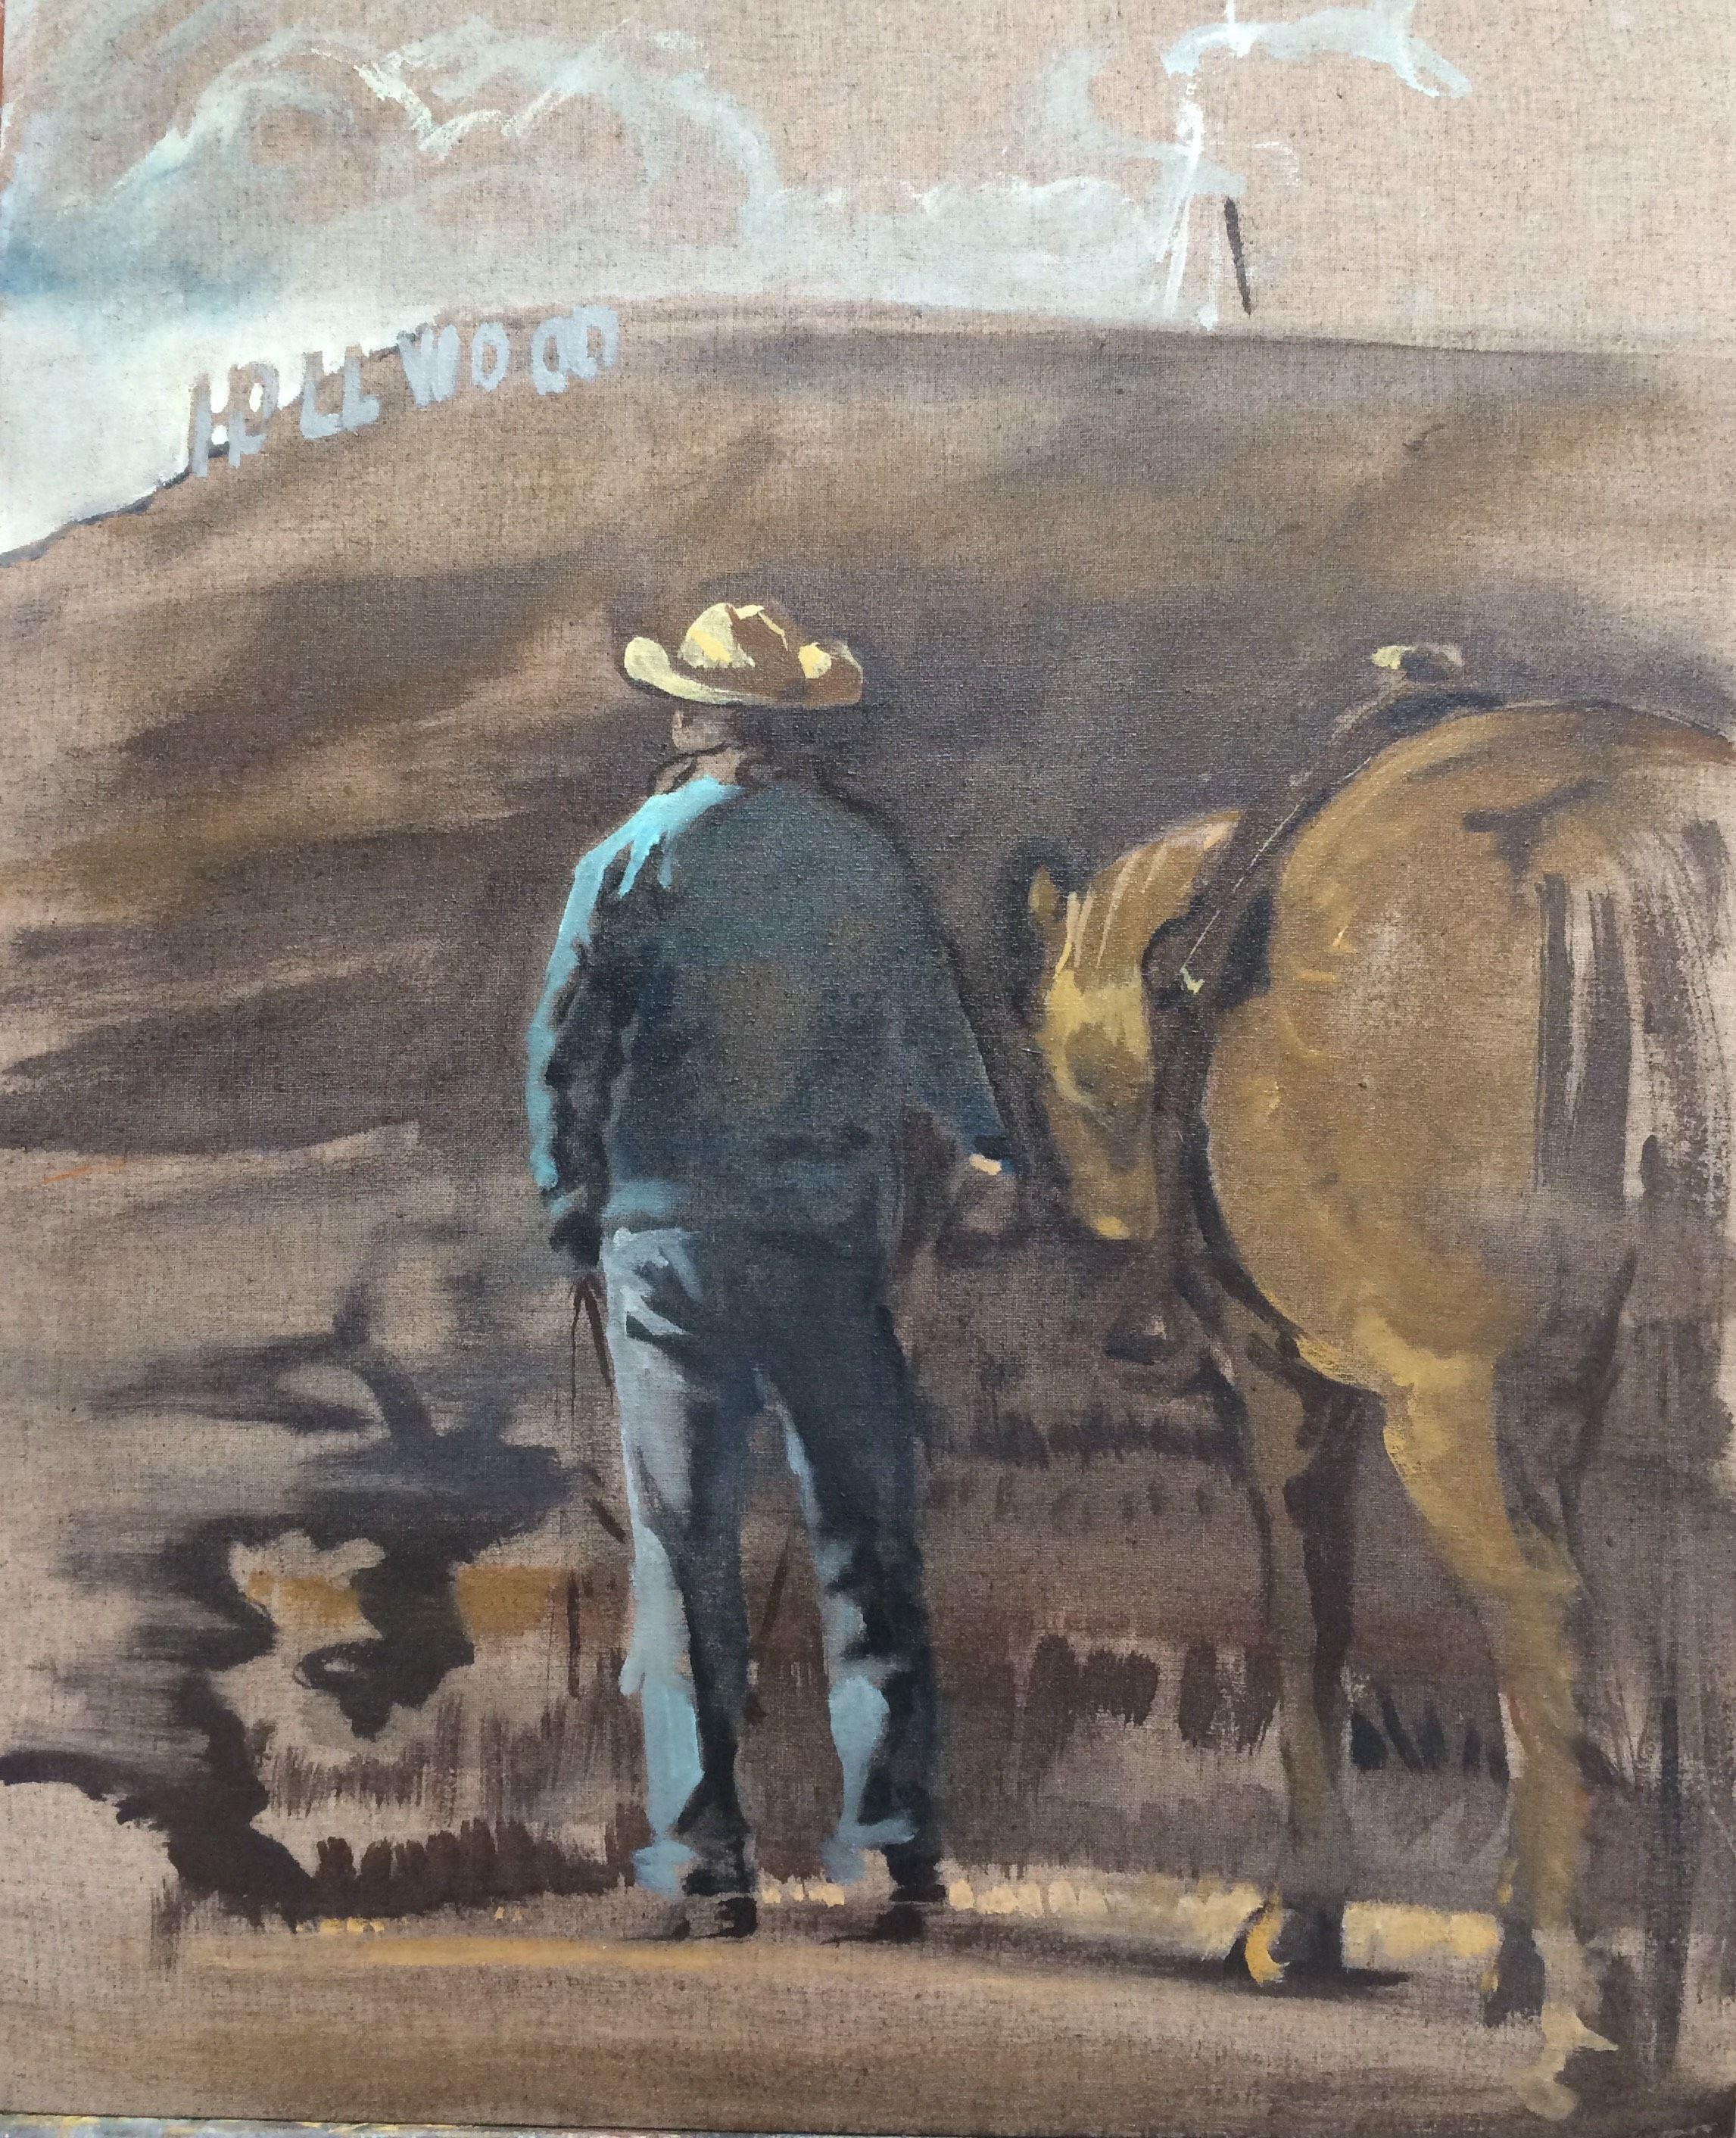 The other day I was browsing through paintings I loved and found myself drawn again and again to cowboy art of Reynolds and Maynard Dixon. What with living at Sunset Ranch under the Hollywood sign this seemed an appropriate painting for me to do.